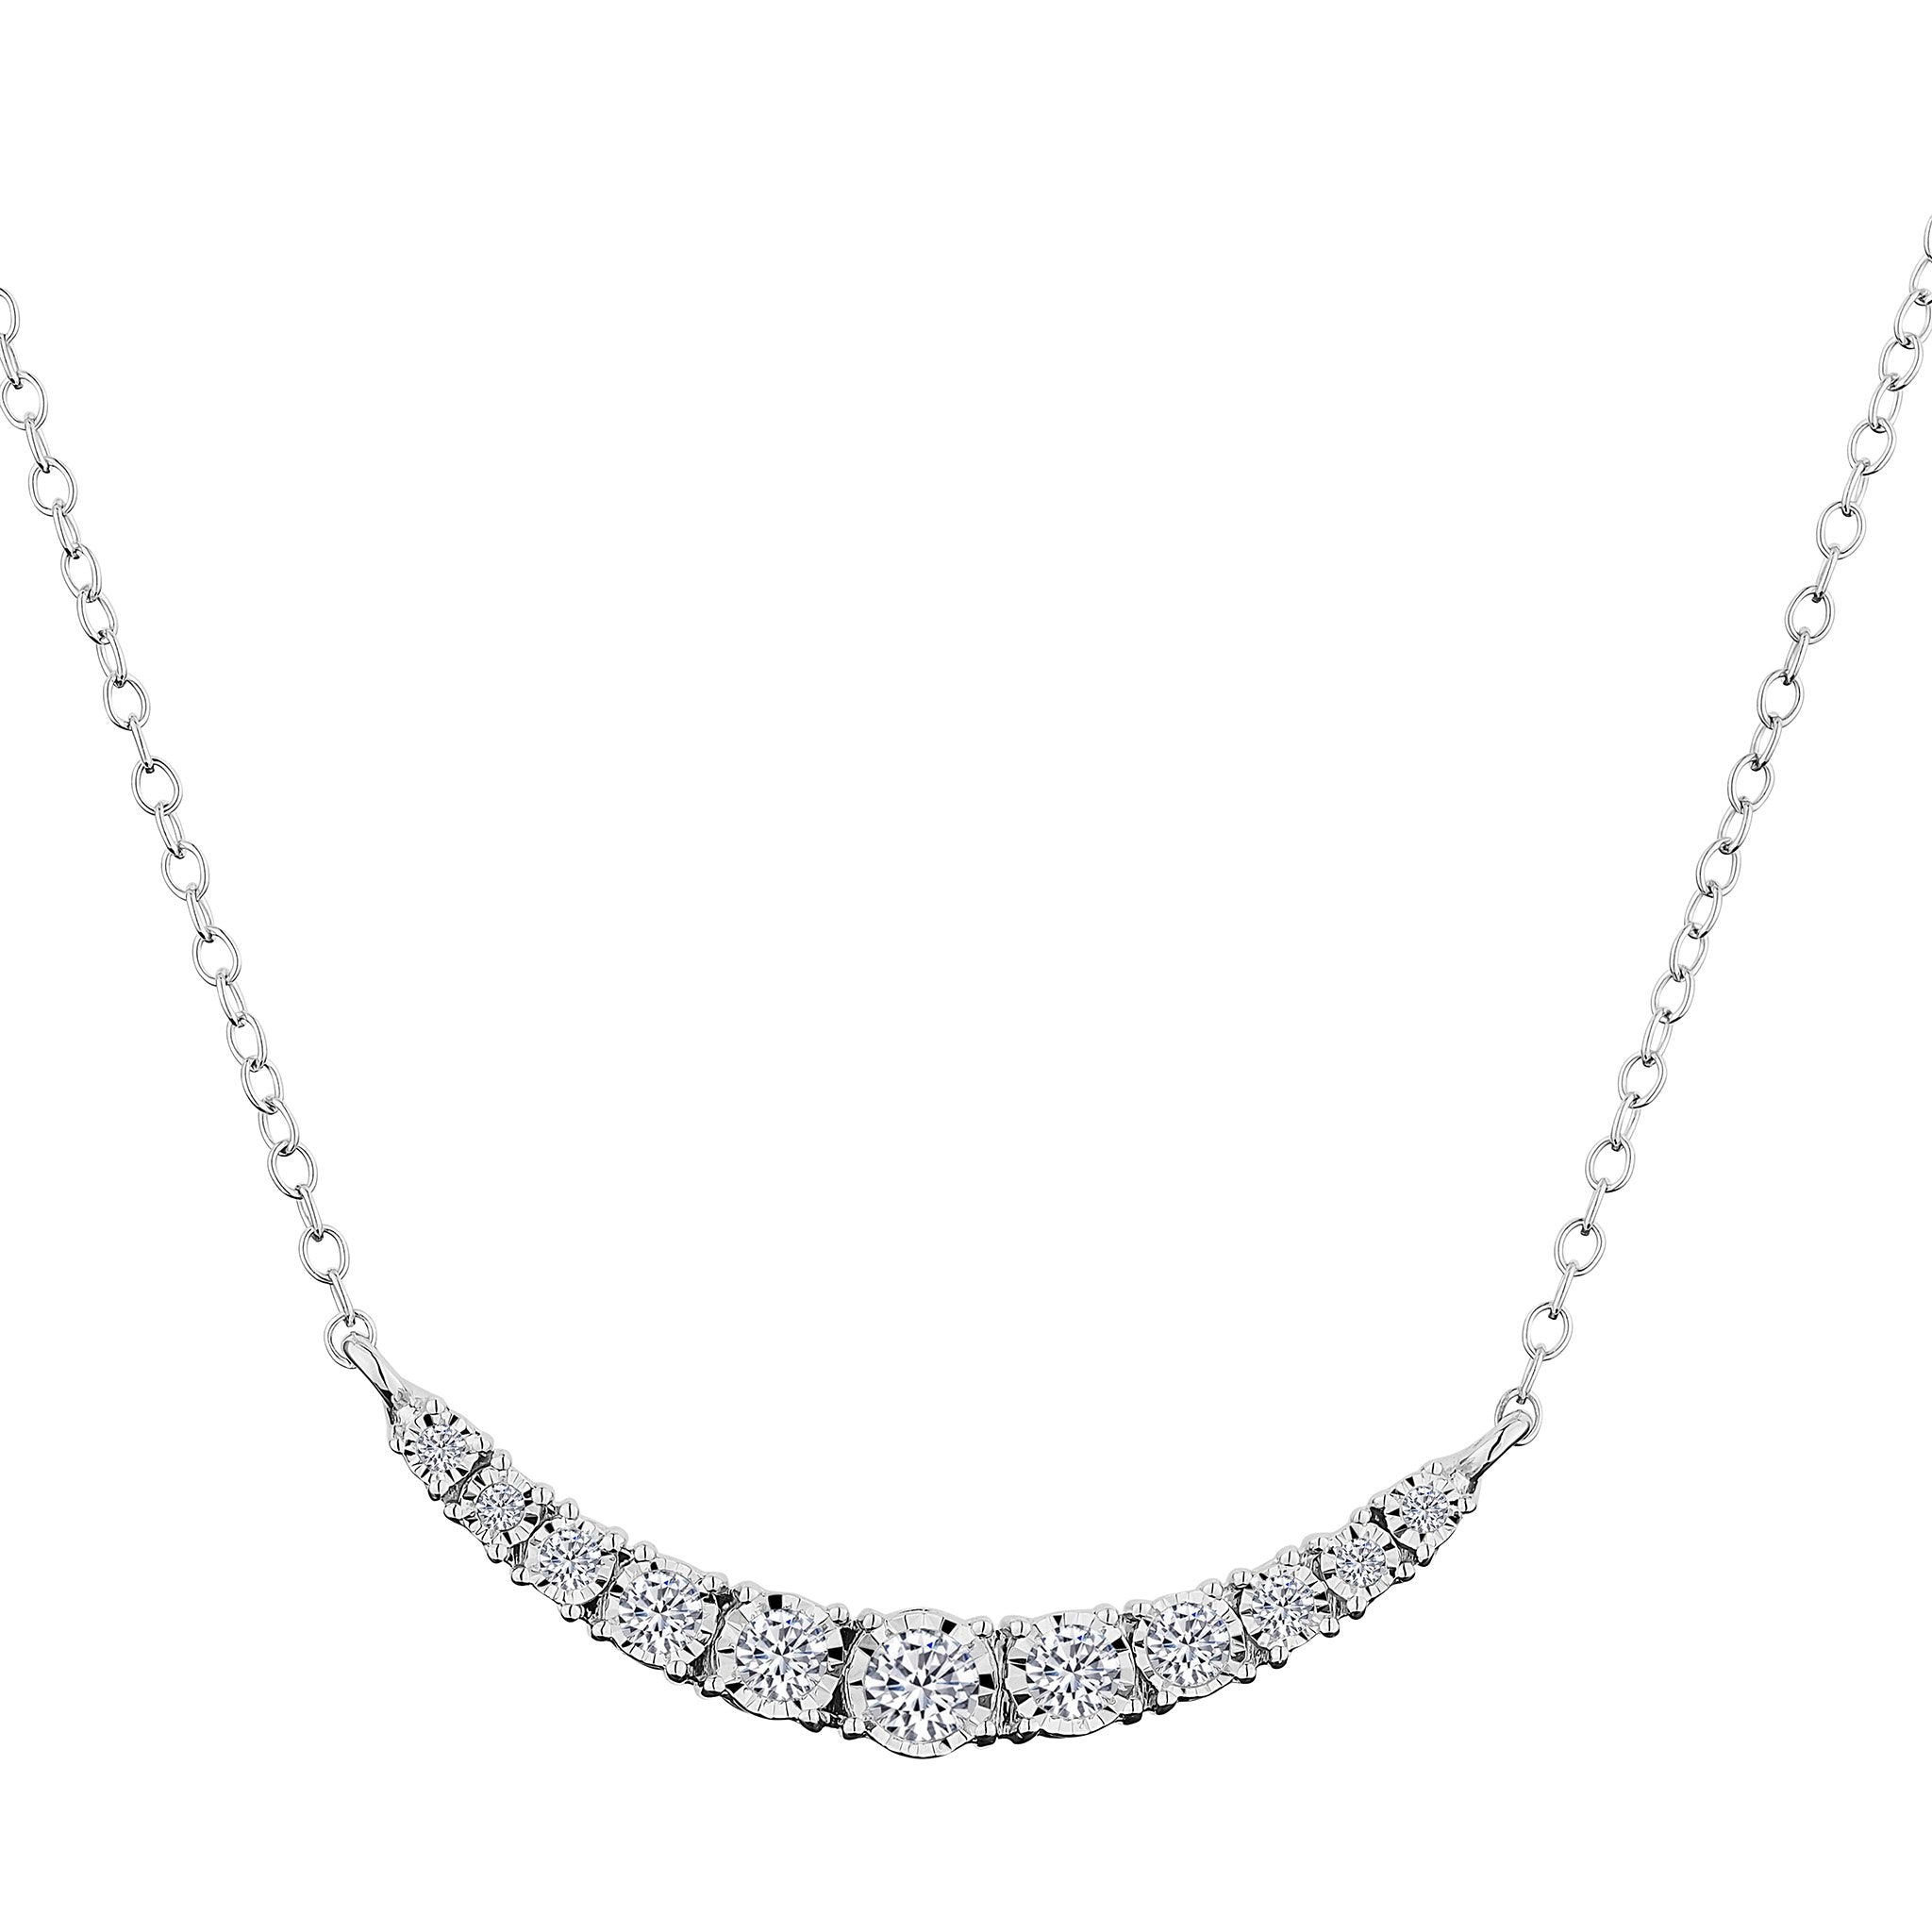 .33 Carat Diamond Necklace,  10kt White Gold. Necklaces and Pendants. Griffin Jewellery Designs. 